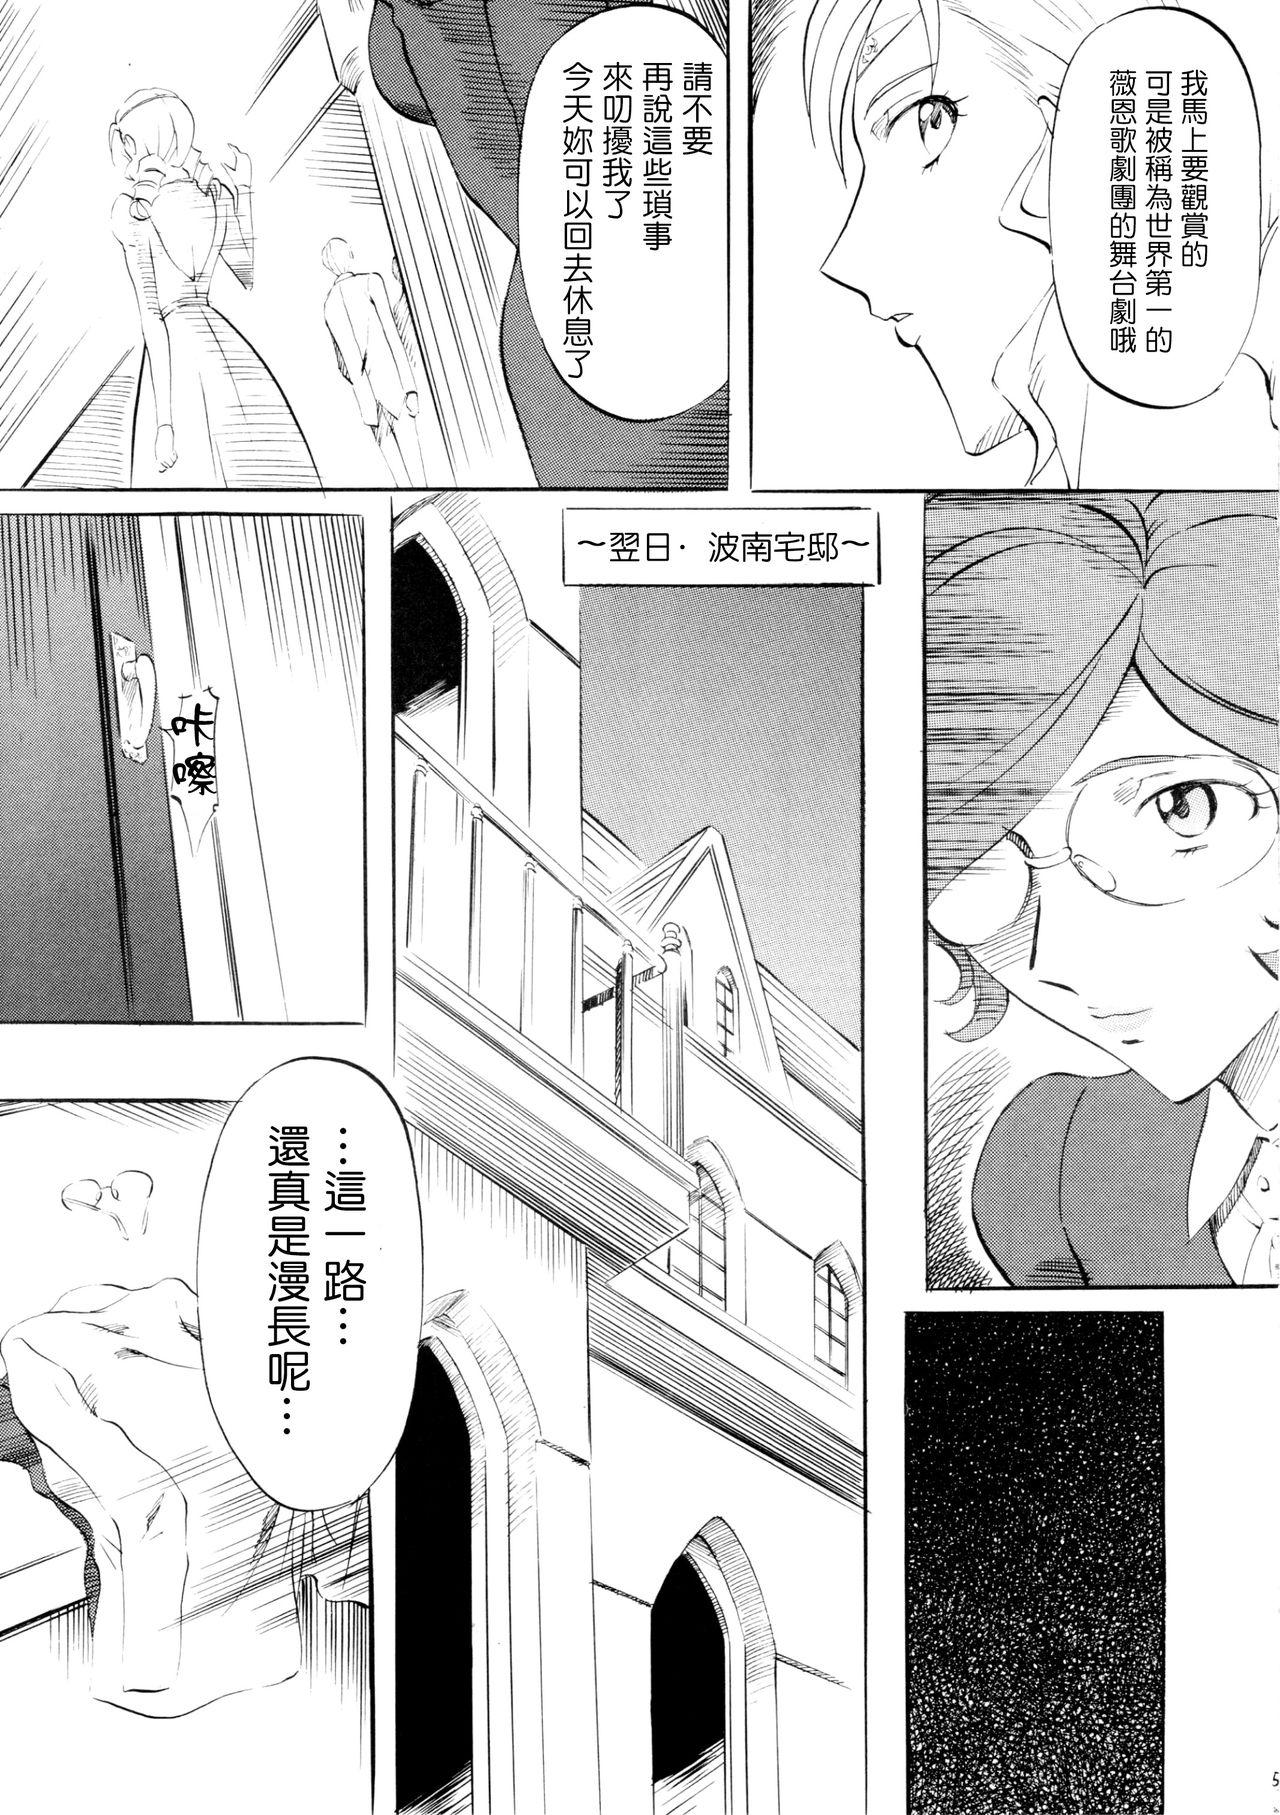 Mature F - Lupin iii Real Amateur - Page 4